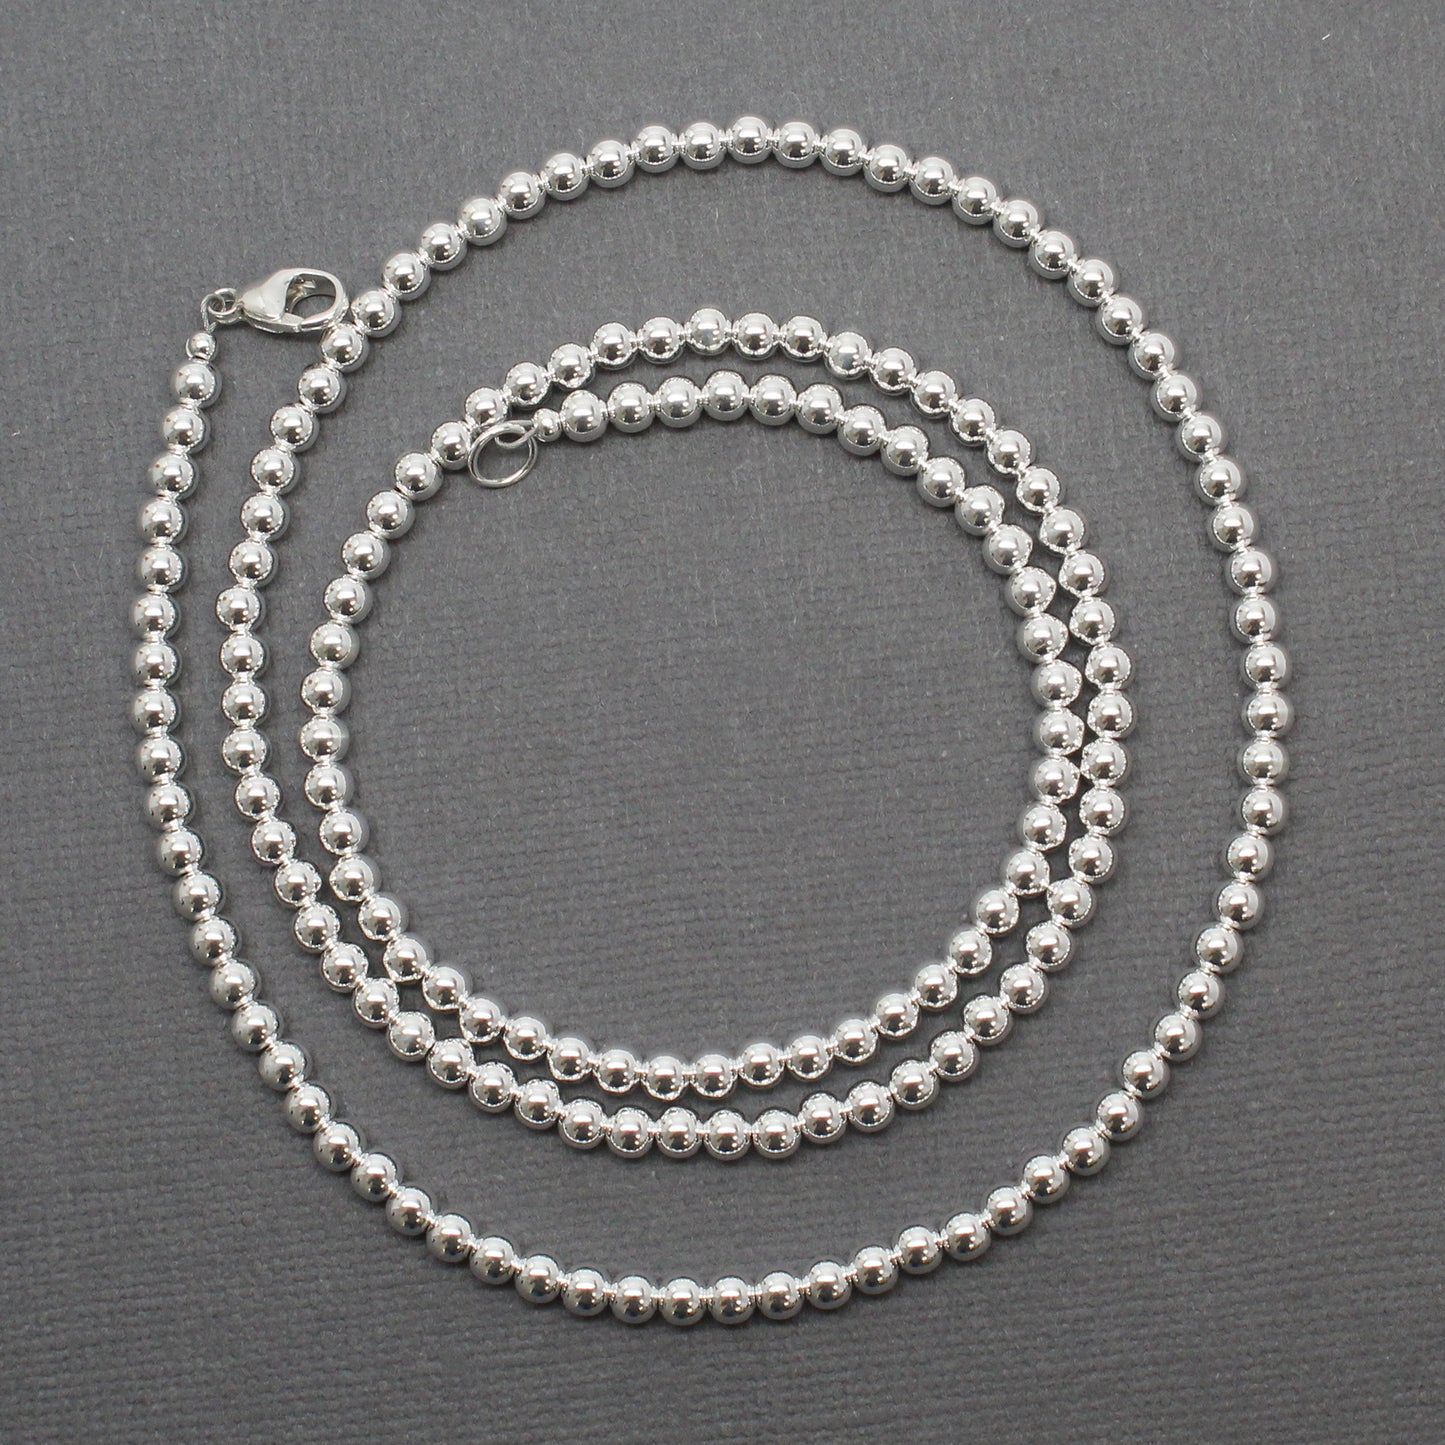 26" 4mm Sterling Silver Bead Necklace Strand